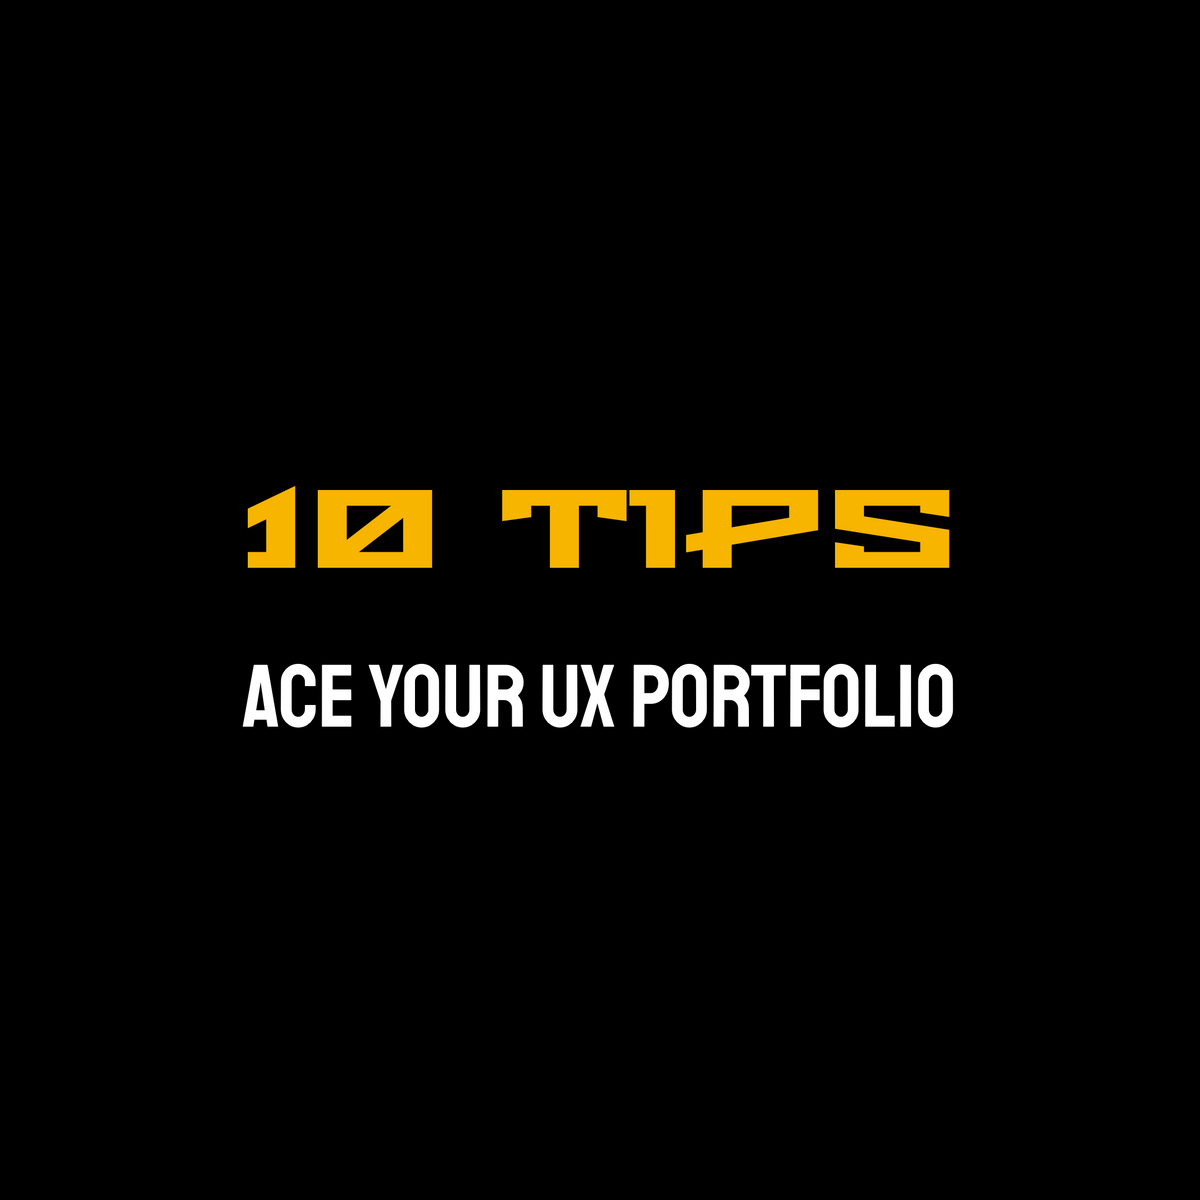 10 timeless tips to ace your UX portfolio